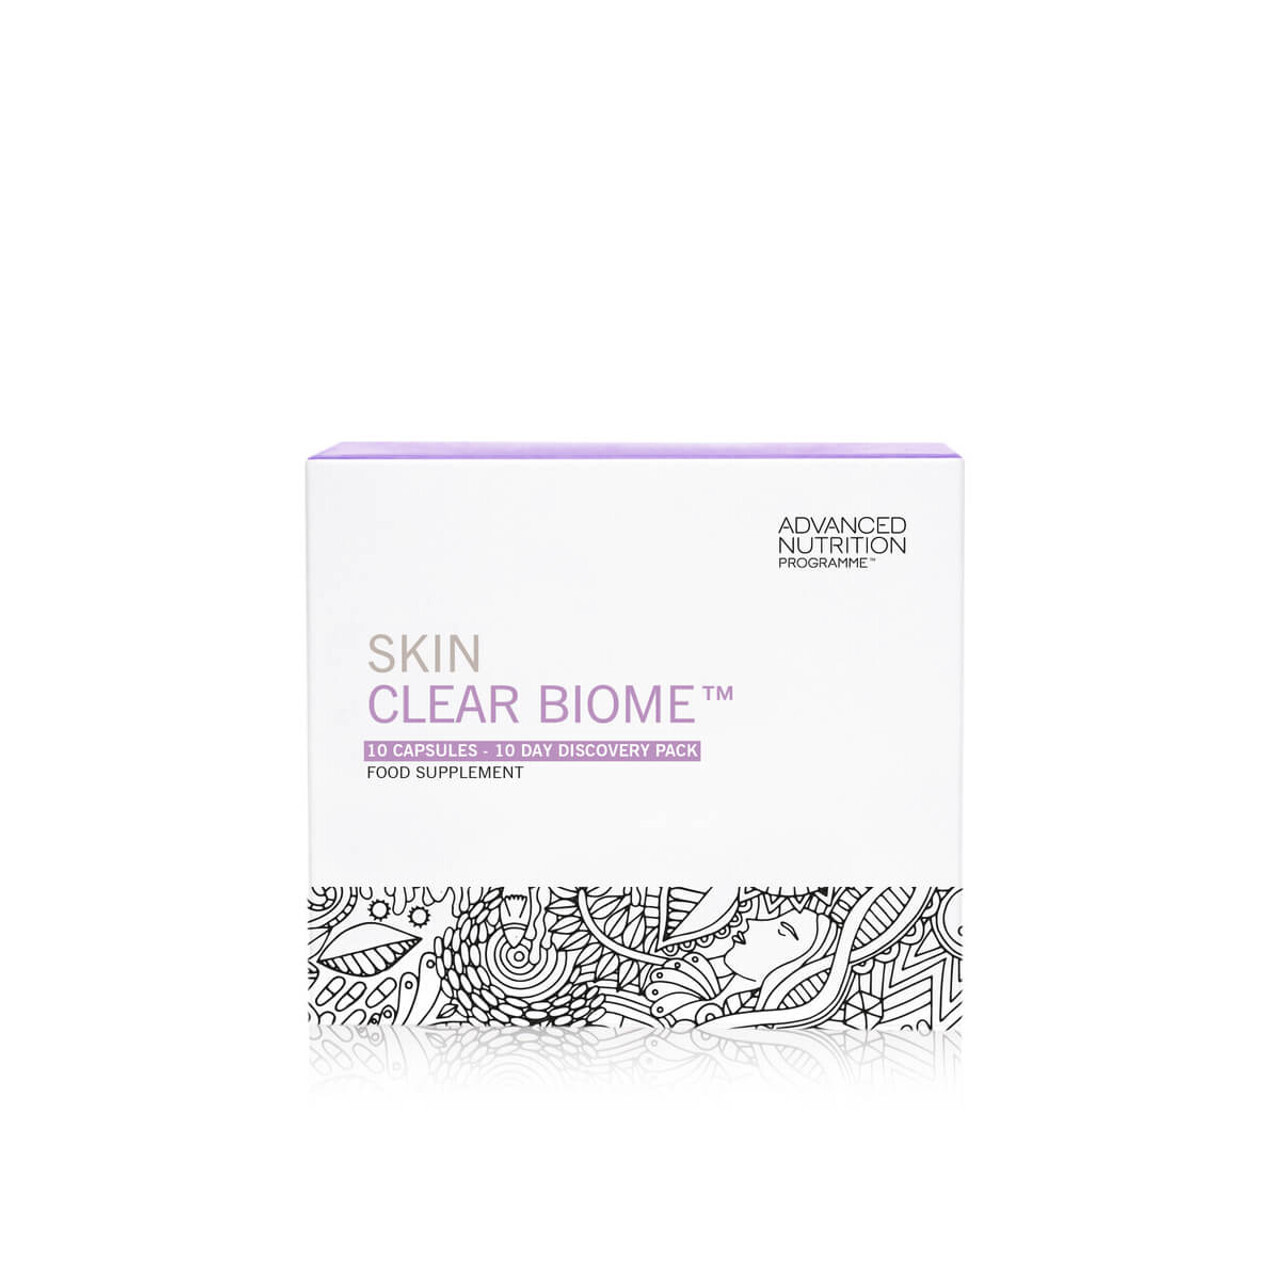 Skin Clear Biome™ 10 day discovery pack